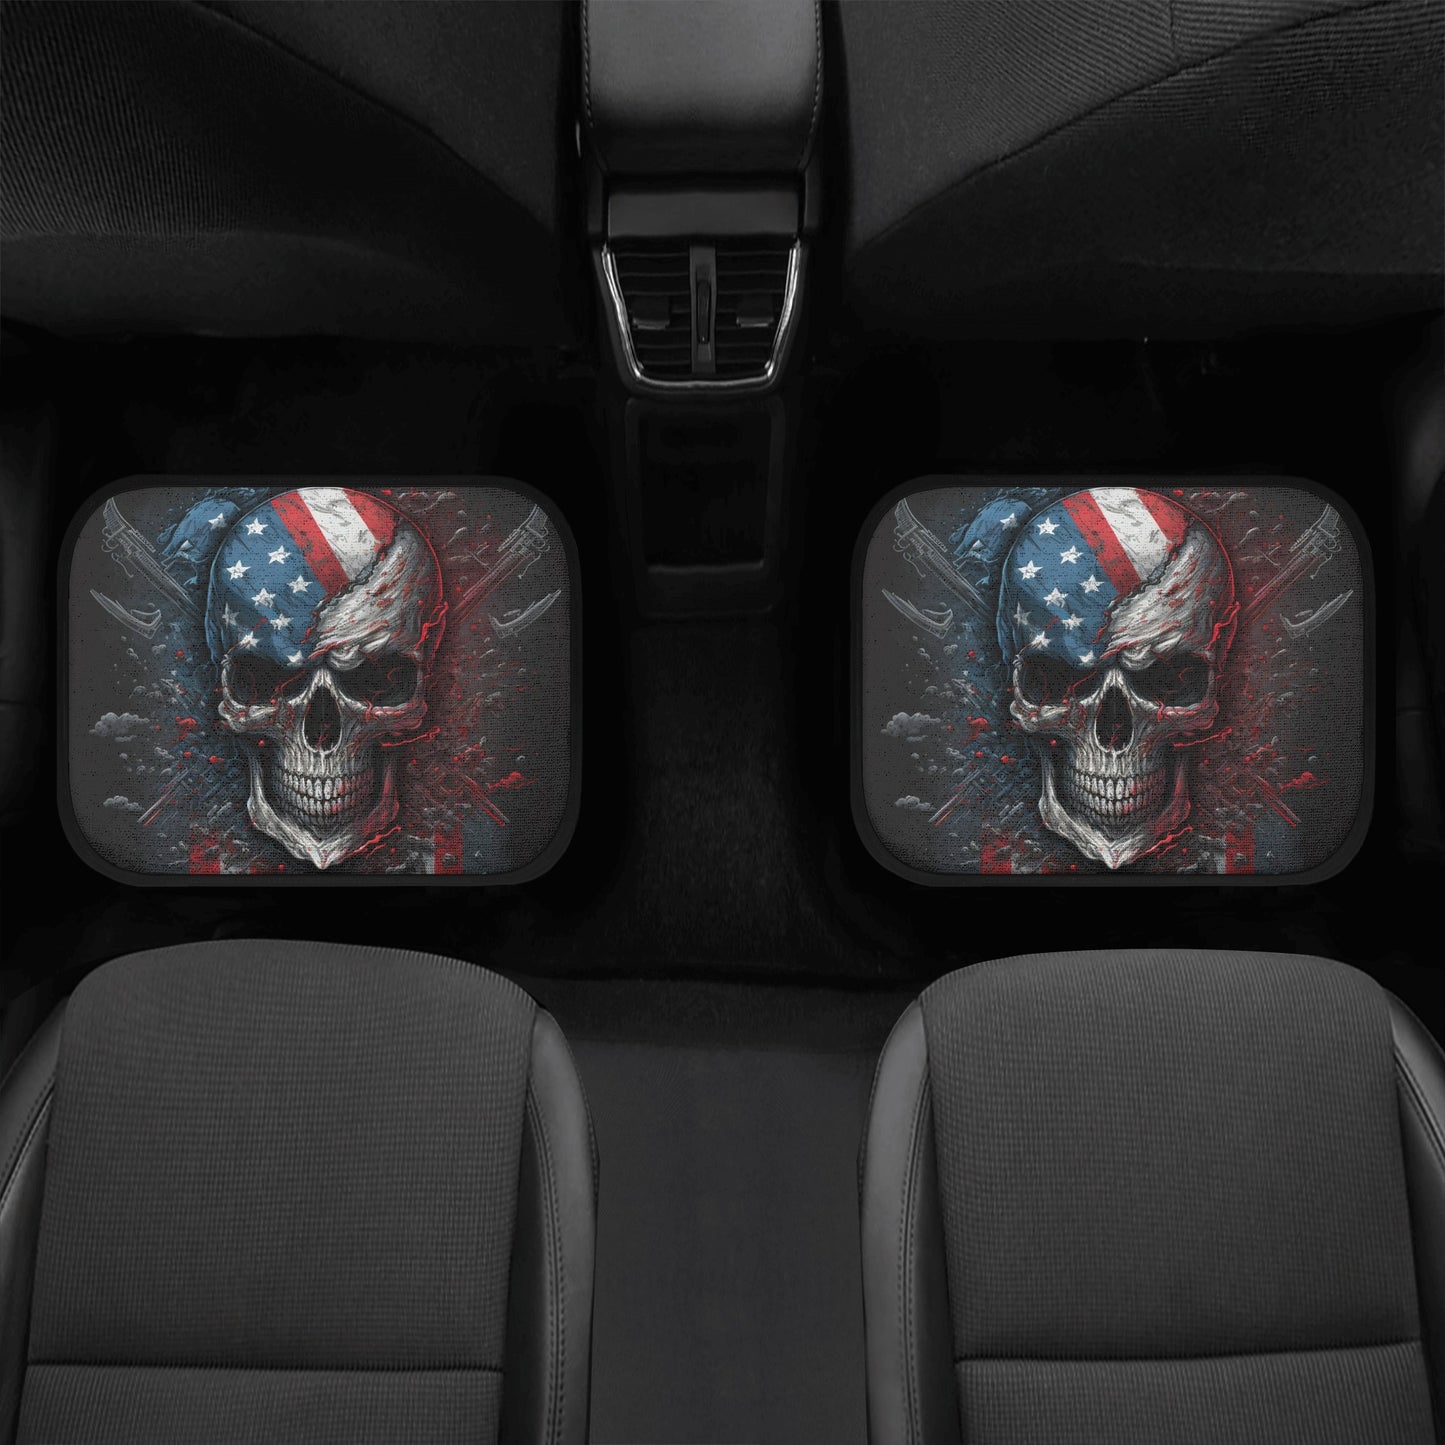 Motorcycle skull car accessories, biker skull car accessories, goth slip-on seat covers, horror car seat protector cover, death skull car fl Back and Front Car Floor Mats